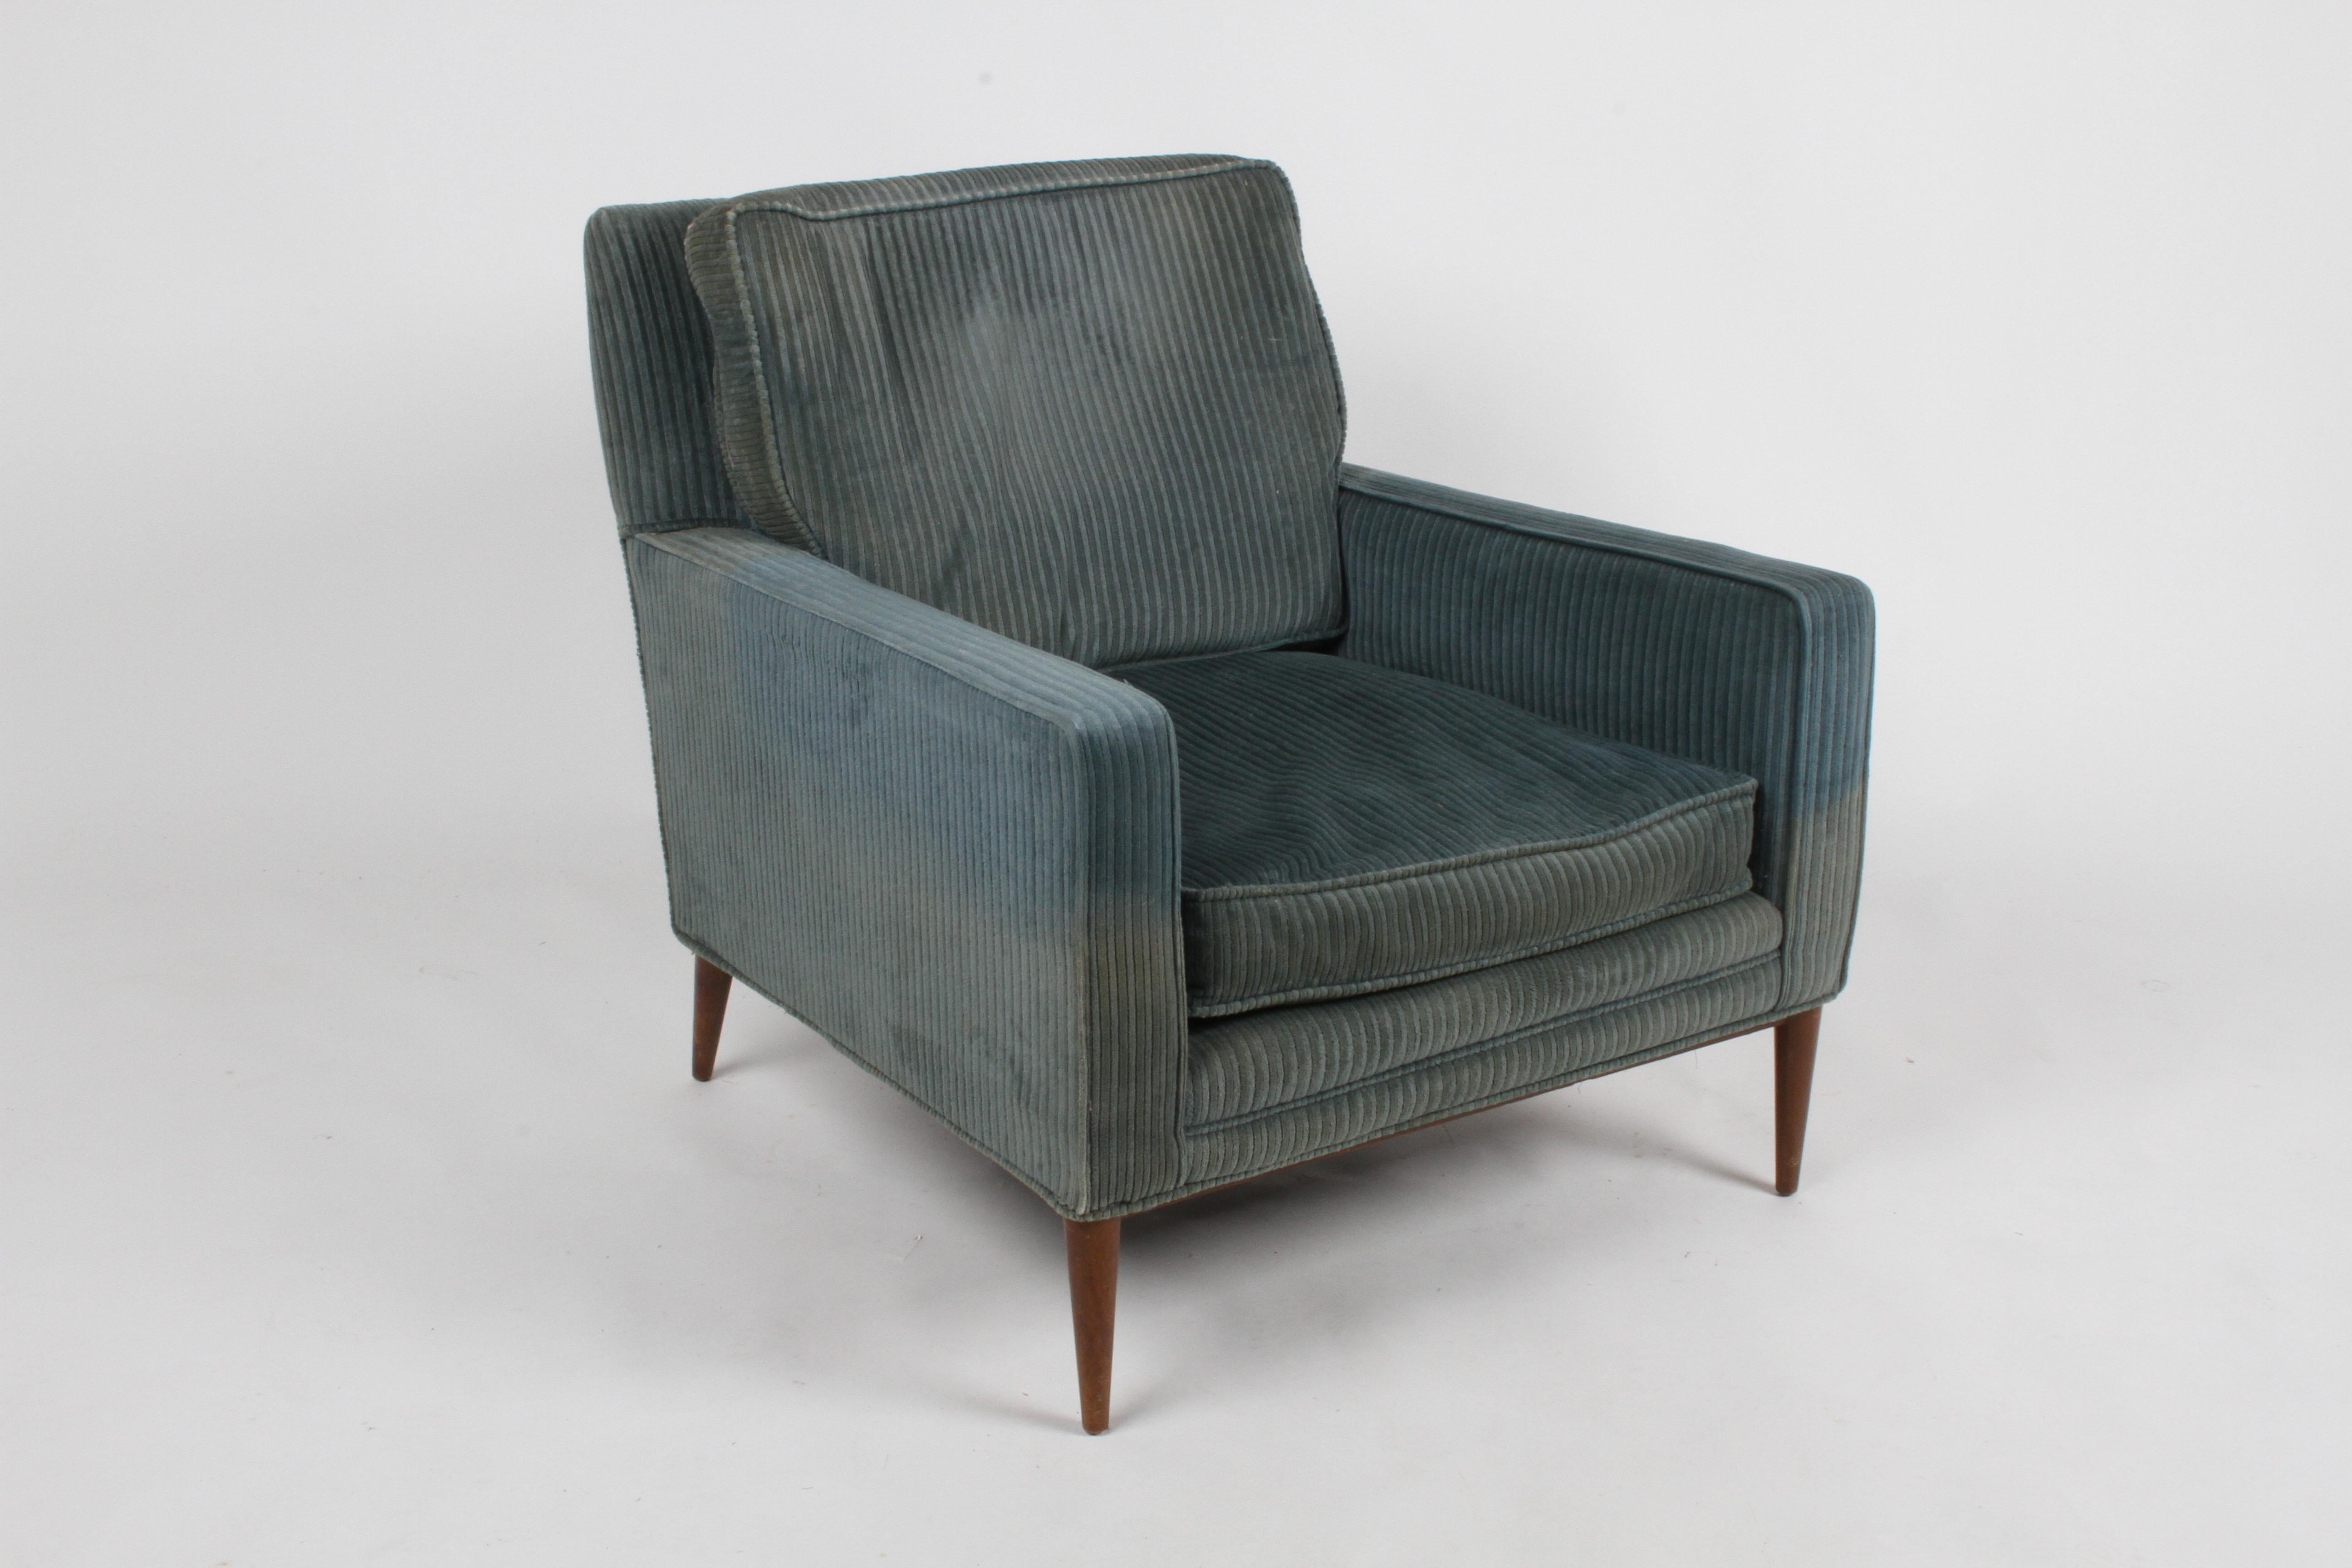 Paul McCobb Mid-Century Modern lounge chair for his Directional line with original walnut finish to maple frame on tapered legs. Older corduroy re-upholstery, upholstery and foam need updating. Front is wider than back, tapers from 30.75